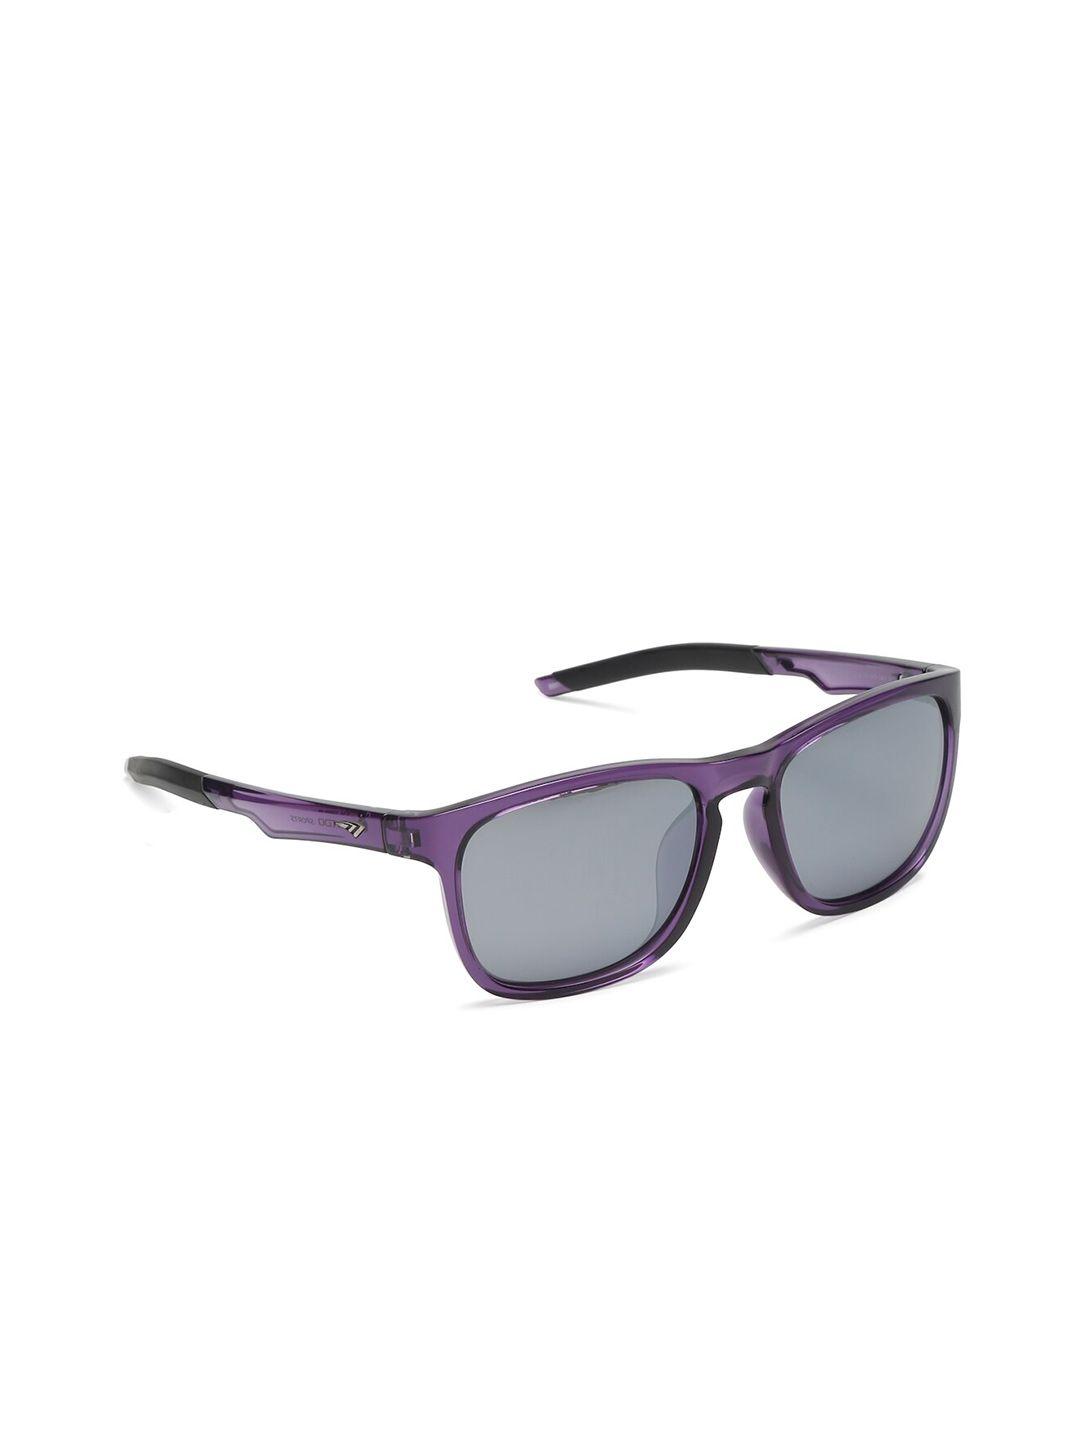 sunnies unisex grey lens & purple square sunglasses with uv protected lens